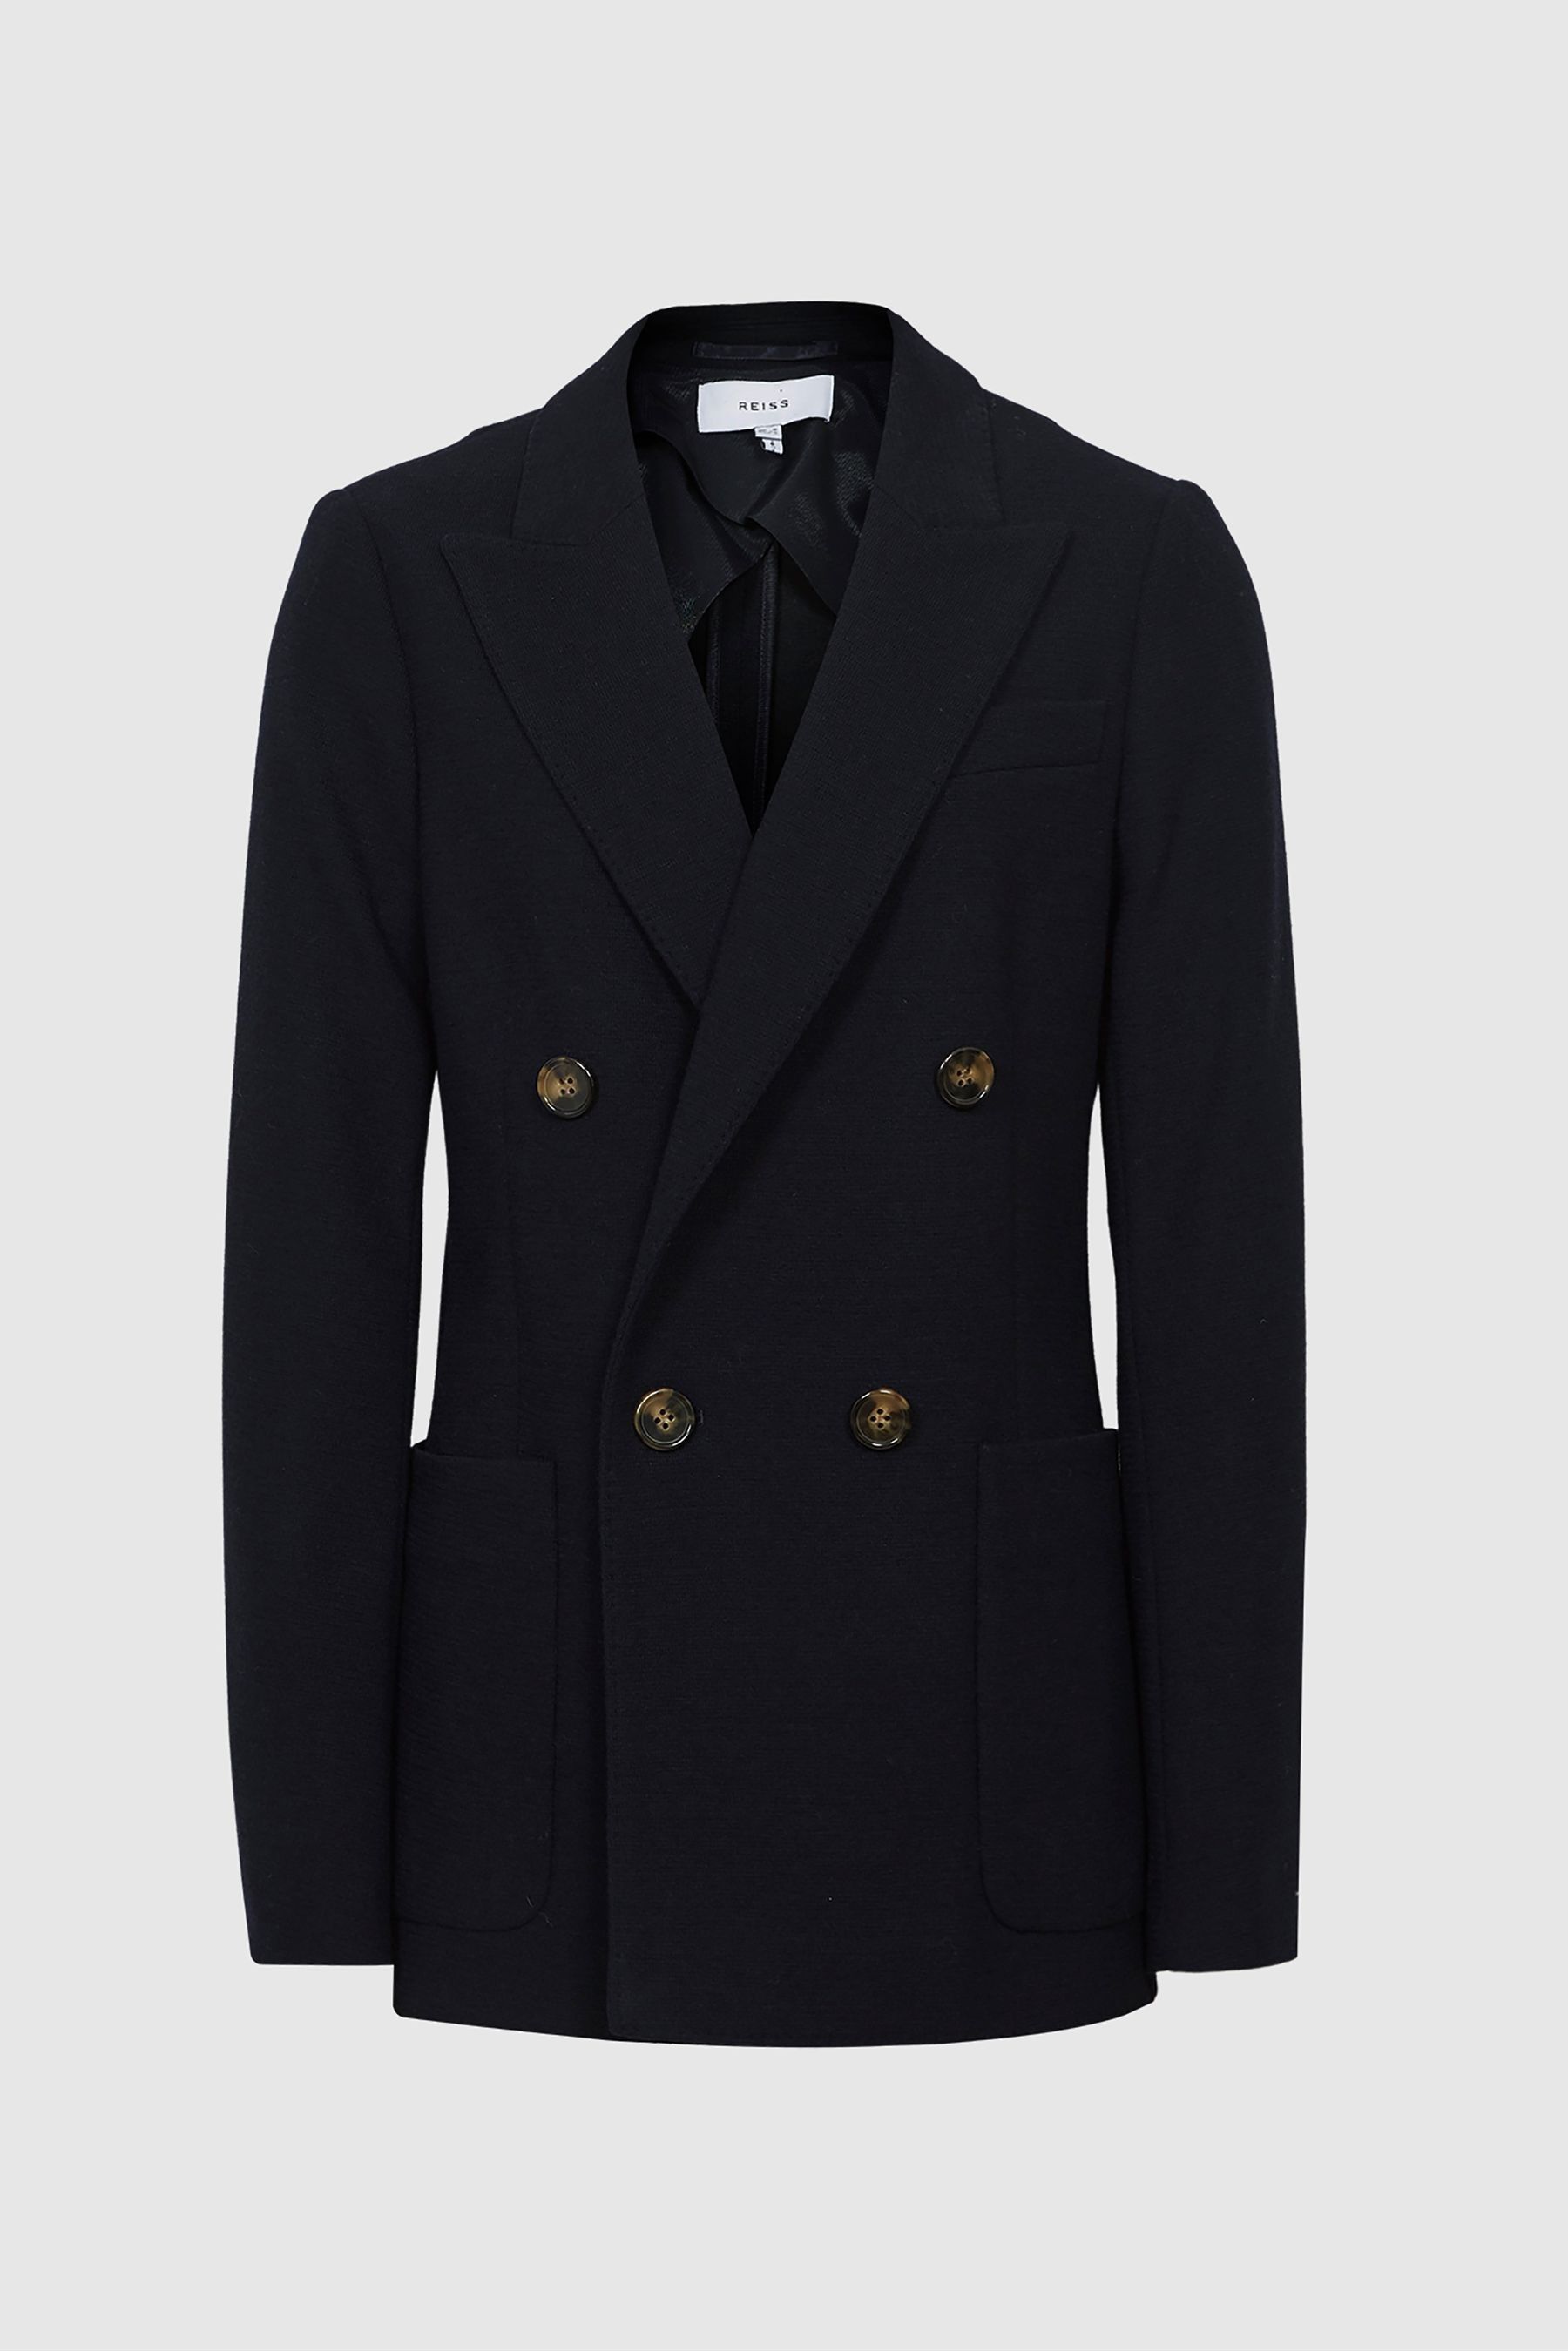 Buy Reiss Navy Iria Double Breasted Wool Blend Suit Blazer from the ...